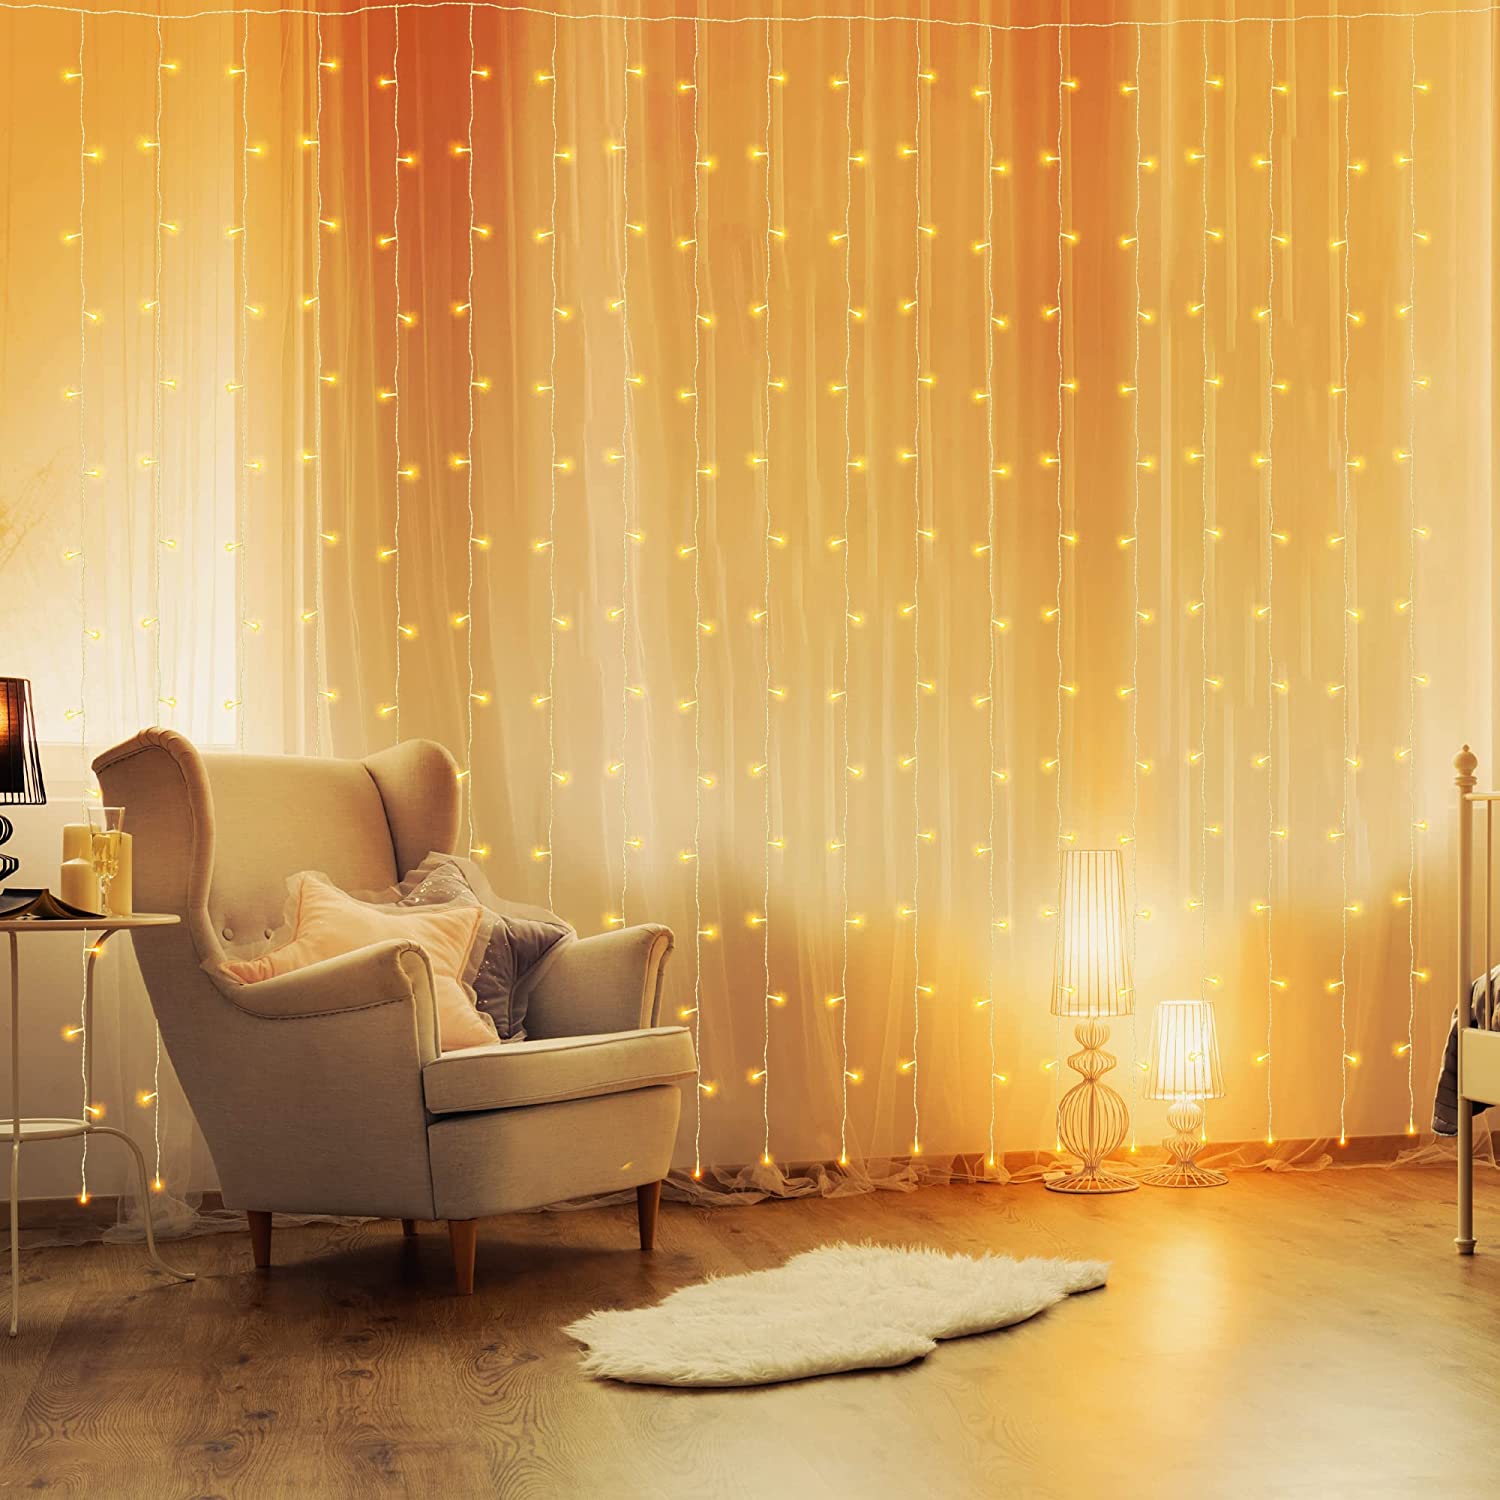 NETTA Curtain Fairy Lights - 3M x 3M, Waterproof LED with Timer, 8 Modes - Warm White